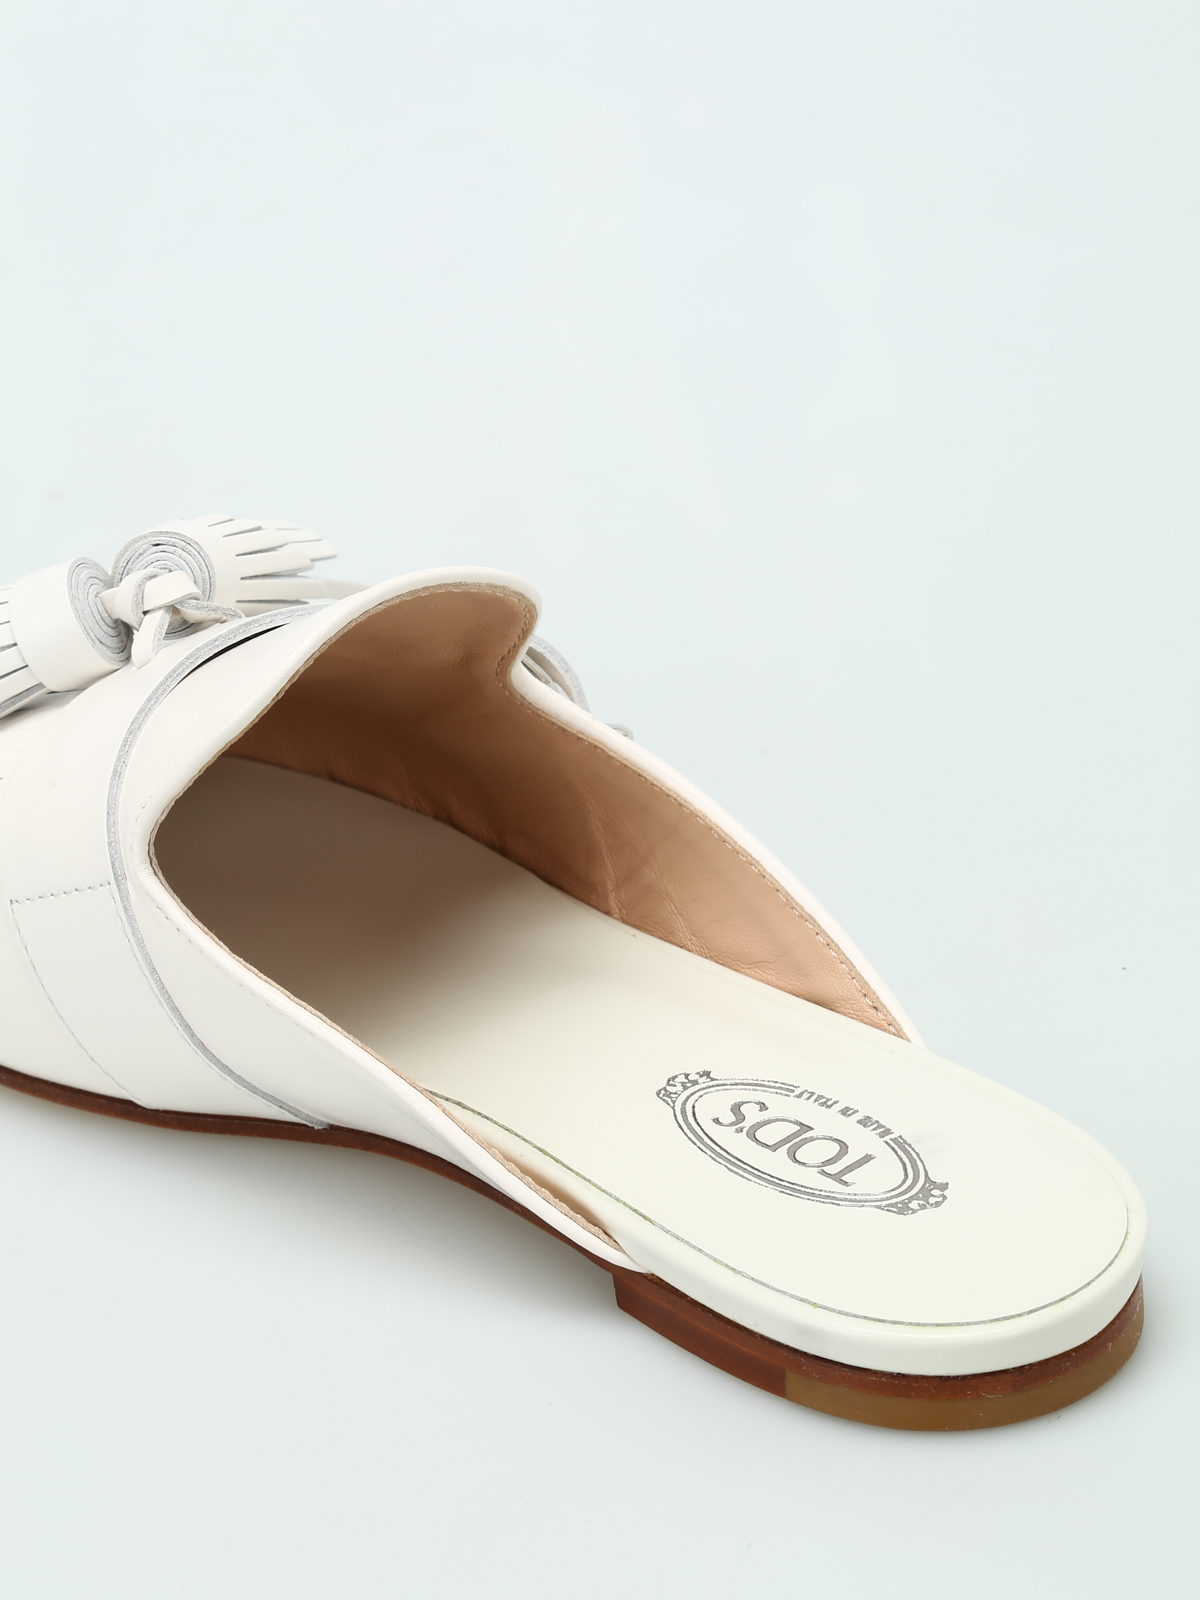 Tod's Chappals & Slippers sale - discounted price | FASHIOLA INDIA